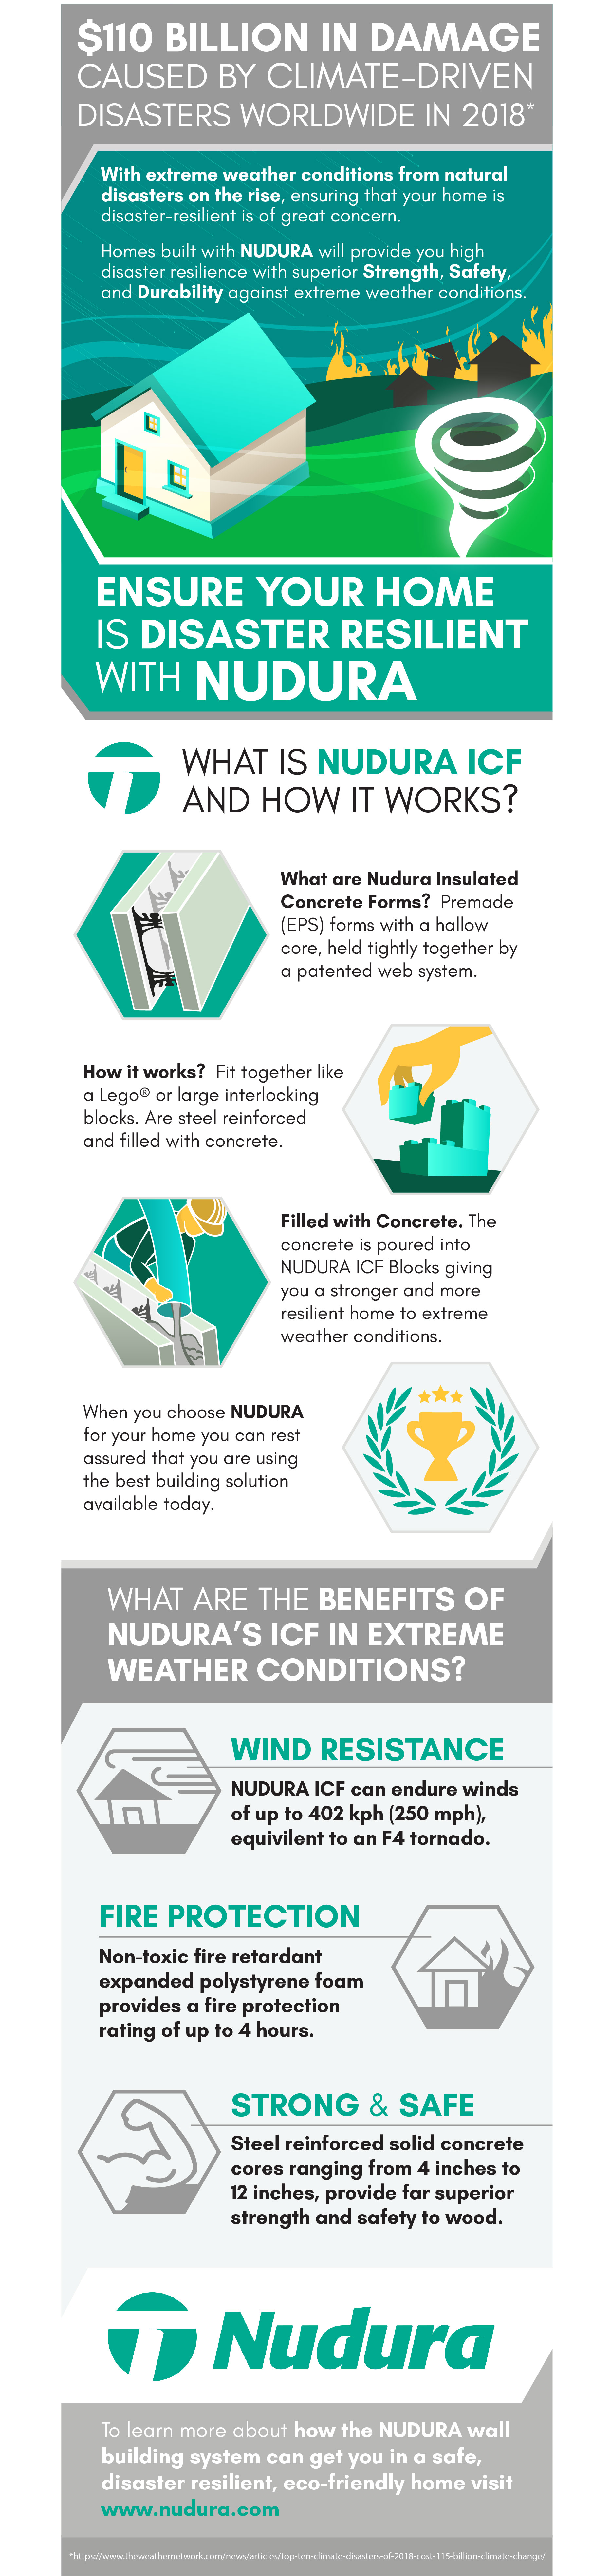 An infographic about disaster resilience with nudura